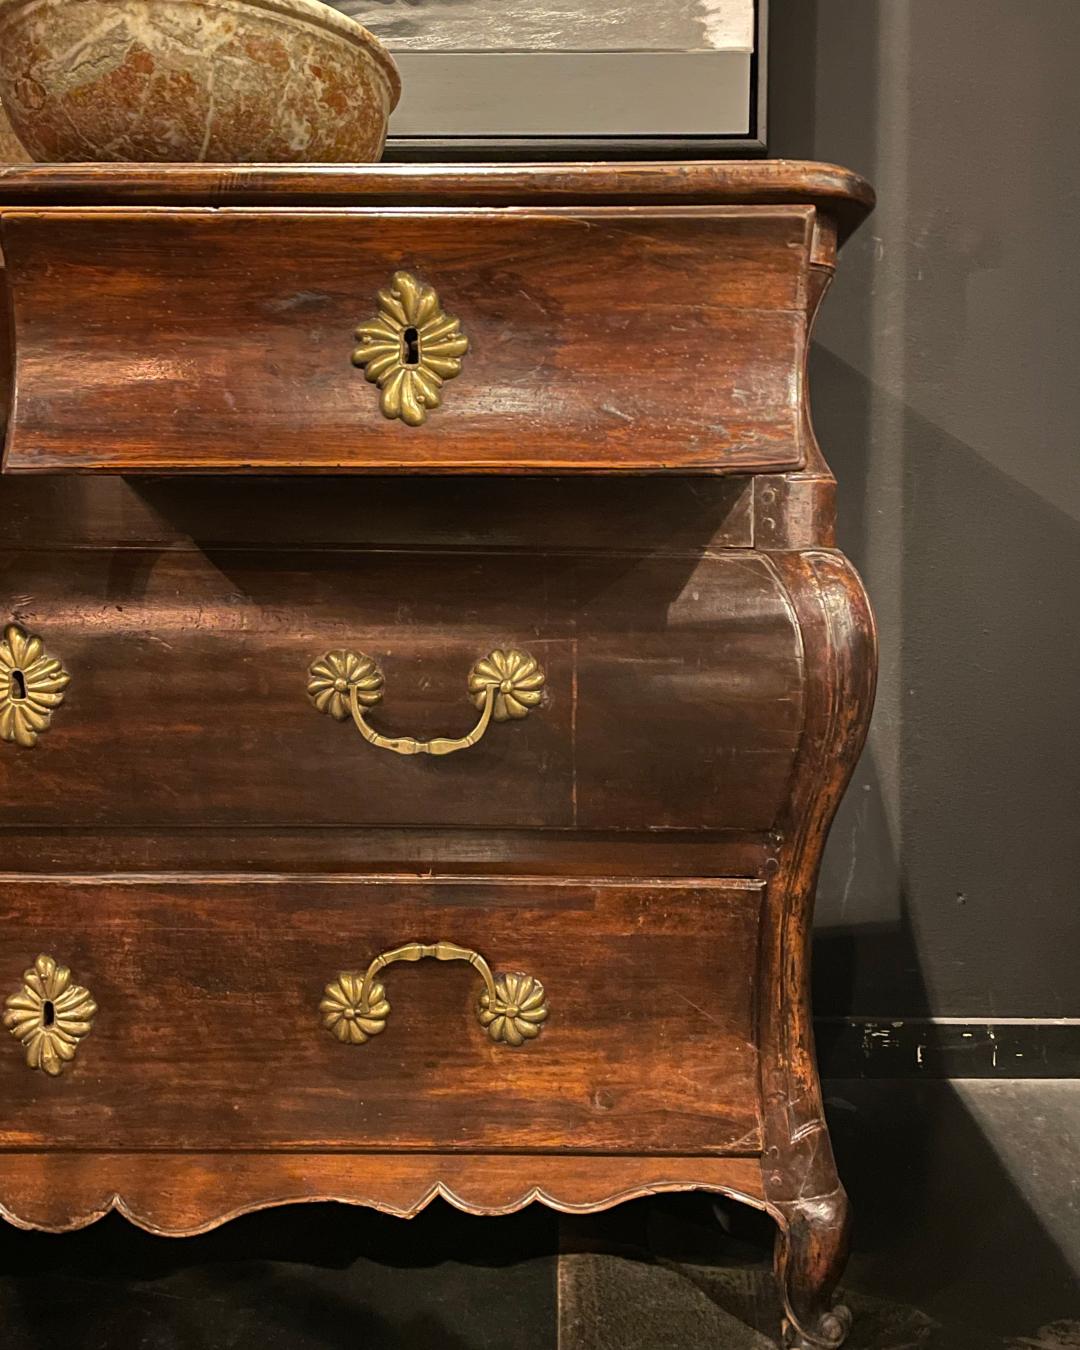 Step into the lavish embrace of the 18th century with this exquisite French solid walnut dresser. This opulent piece, a testament to the grandeur of French design, boasts a meticulous construction in rich, solid walnut. Adorned with four drawers,